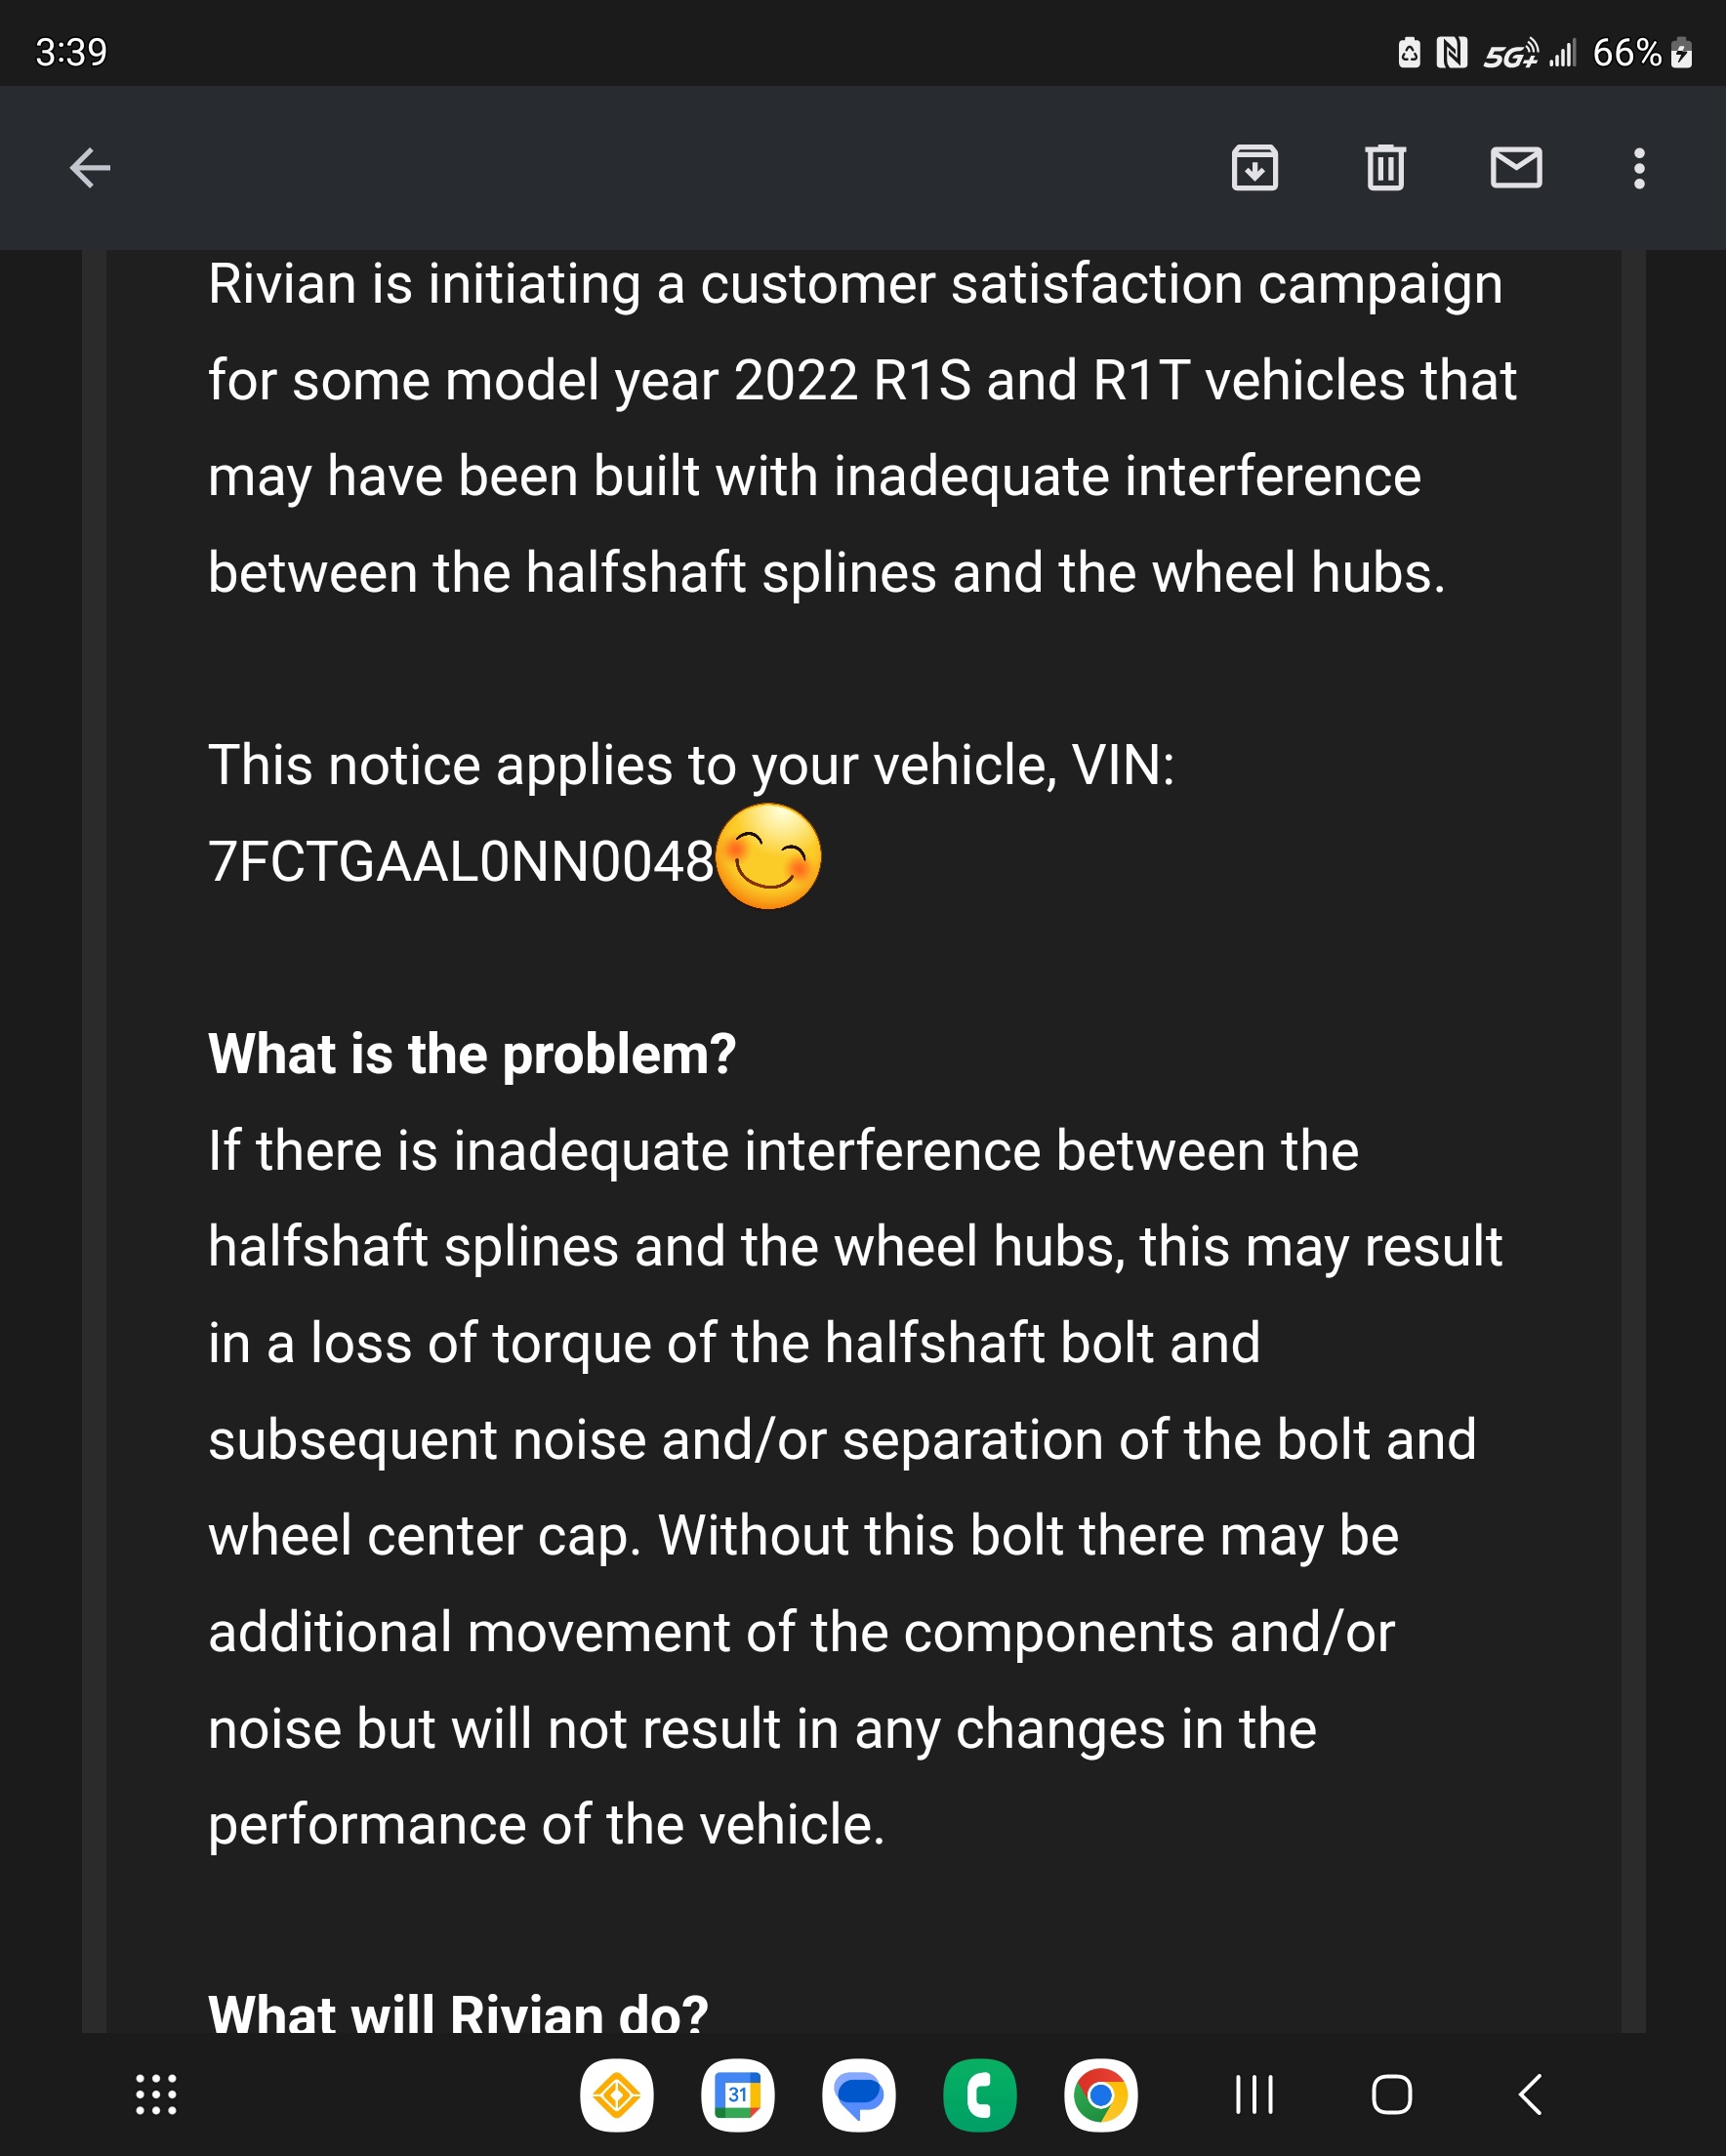 Rivian R1T R1S Customer Satisfaction Campaign (Recall?) Notice: inadequate interference between the halfshaft splines and the wheel hubs Screenshot_20230720_153910_Gmail